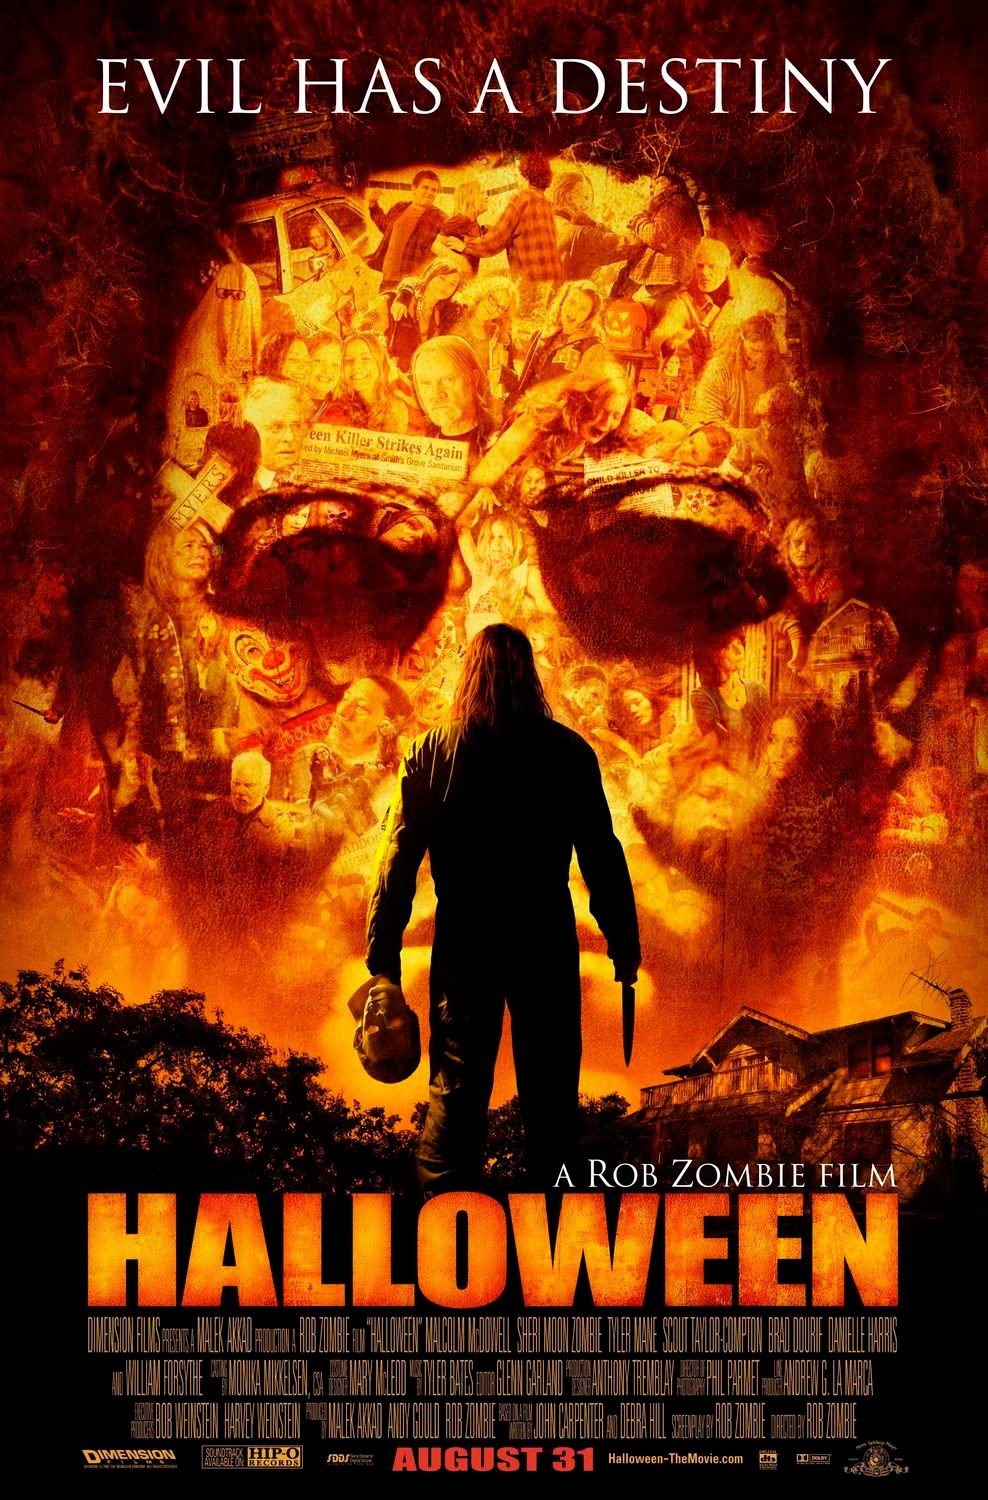 robotGEEK'S Cult Cinema: My review of Halloween (2007) and an apology